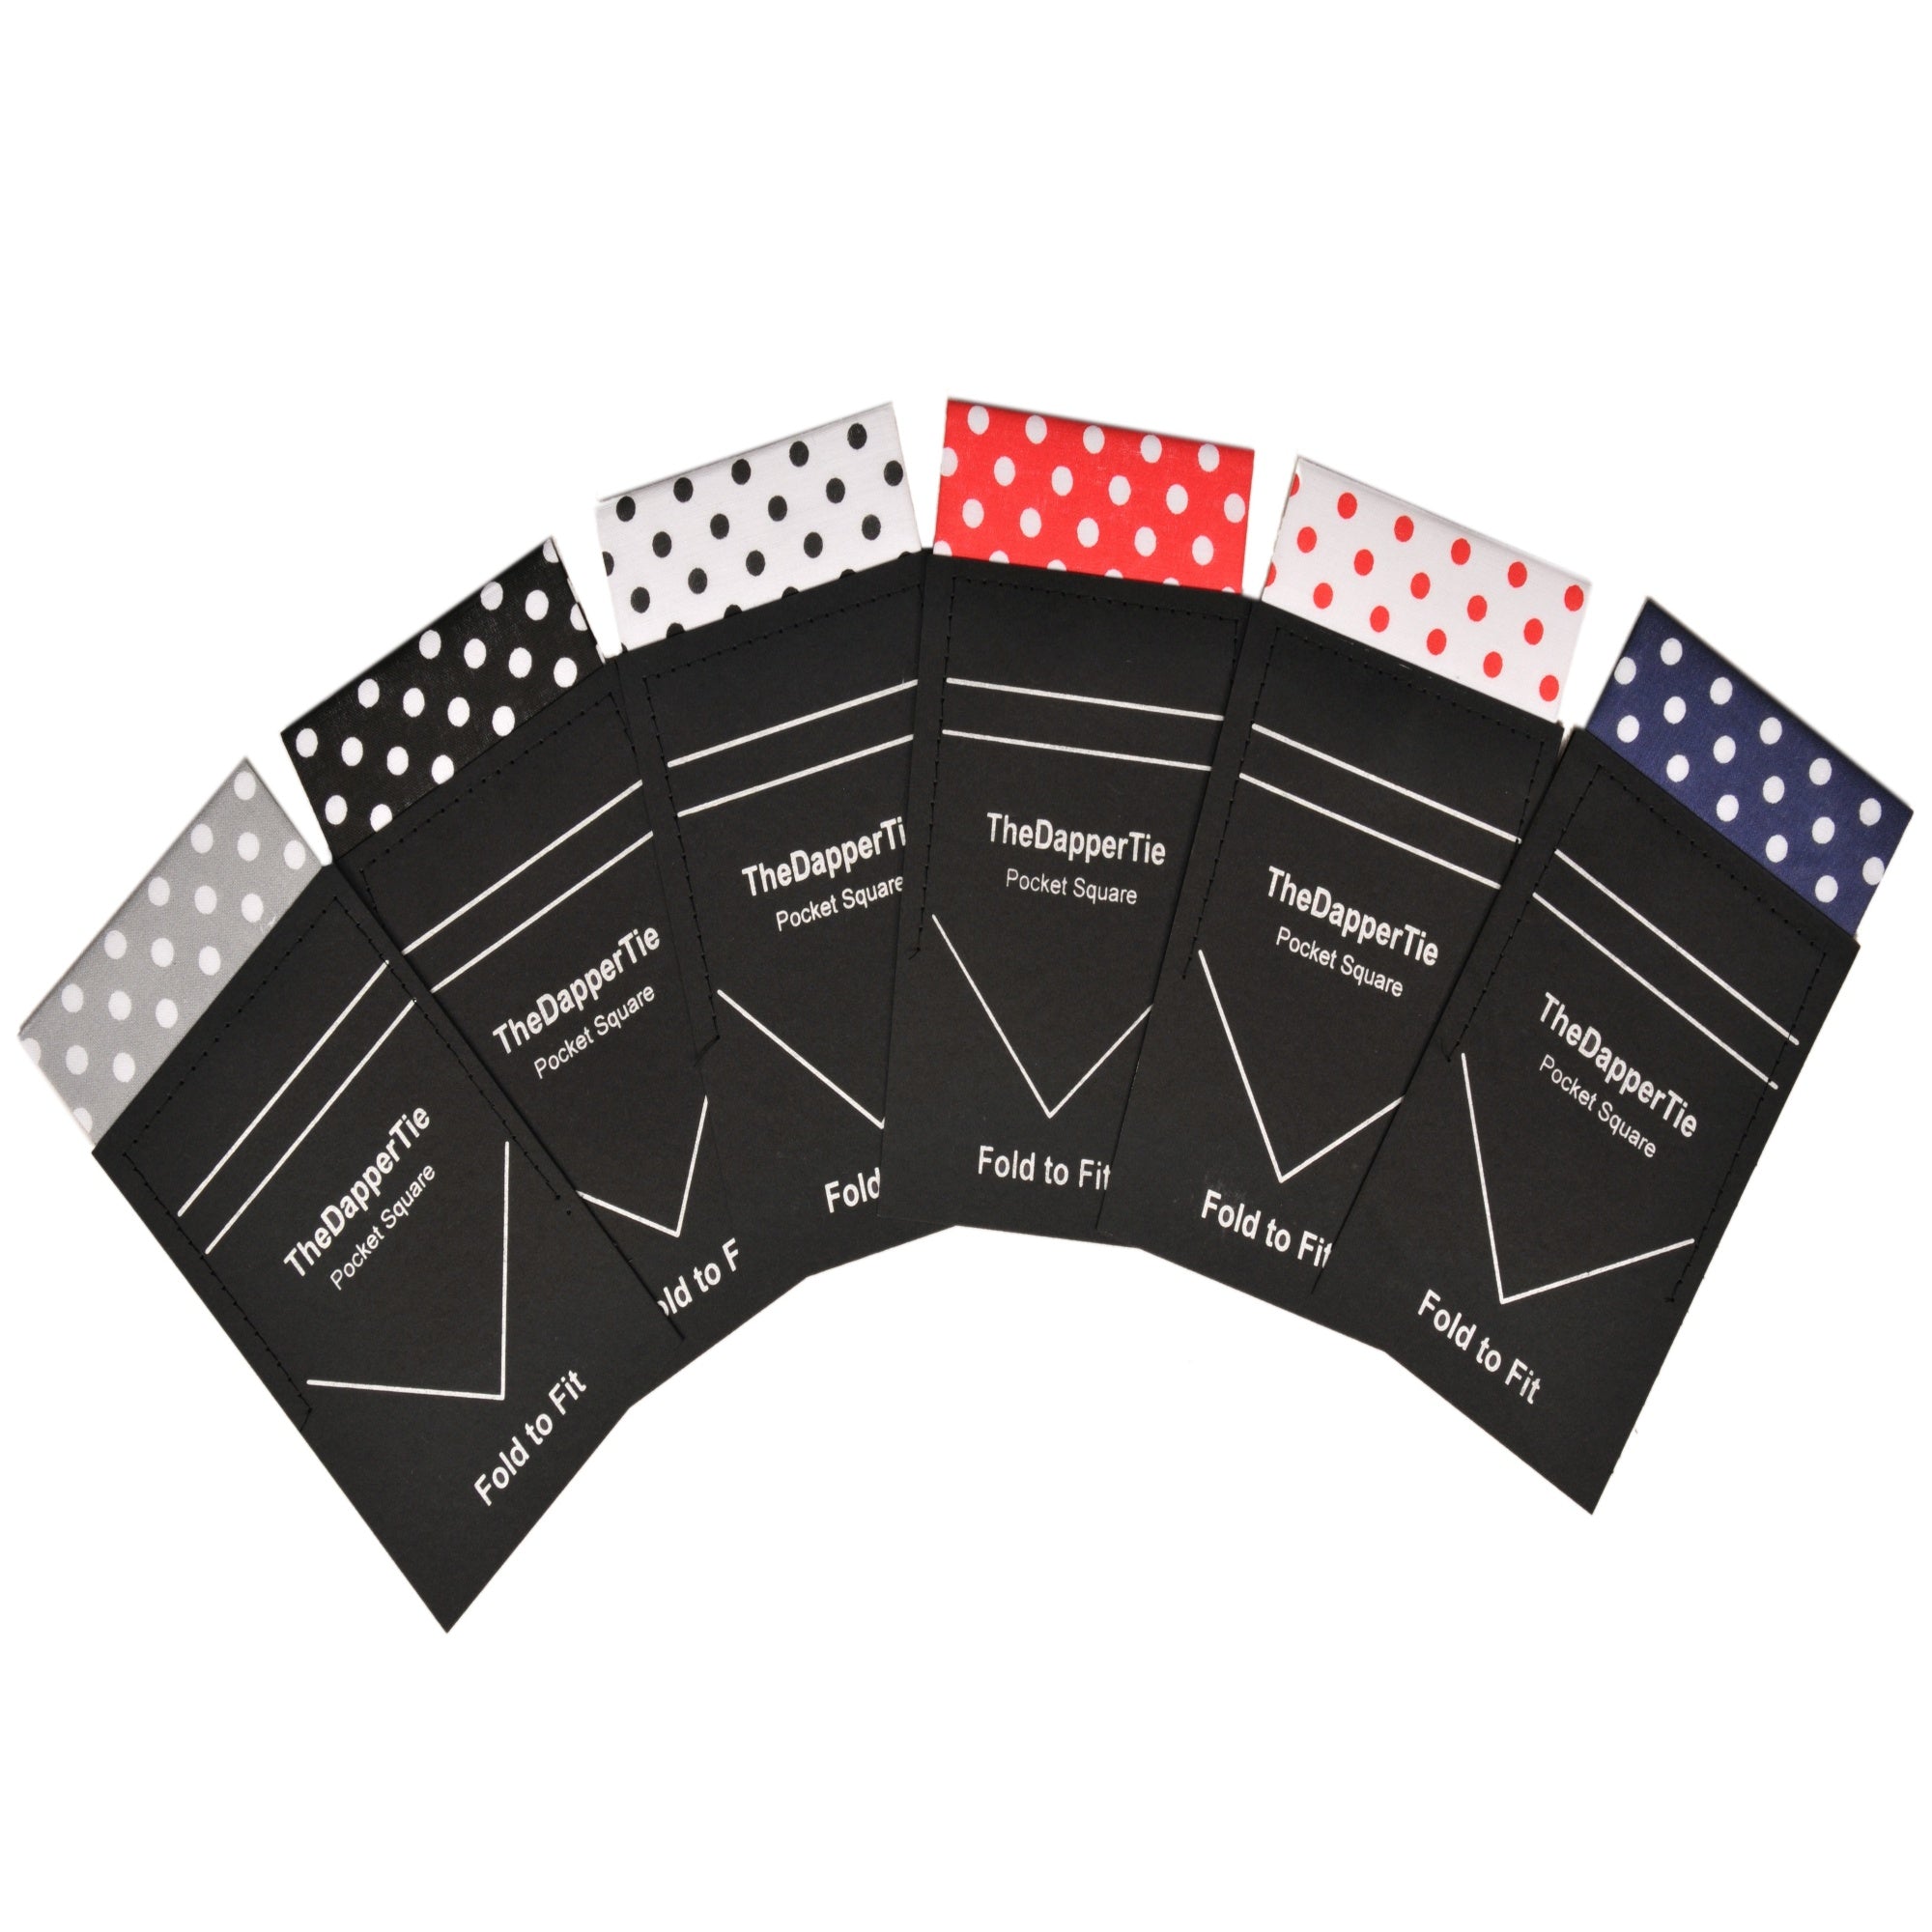 New Men's Polka Dots 100% Cotton Flat Pre Folded Pocket Square on Card - TheDapperTie Prefolded Pocket Squares TheDapperTie   